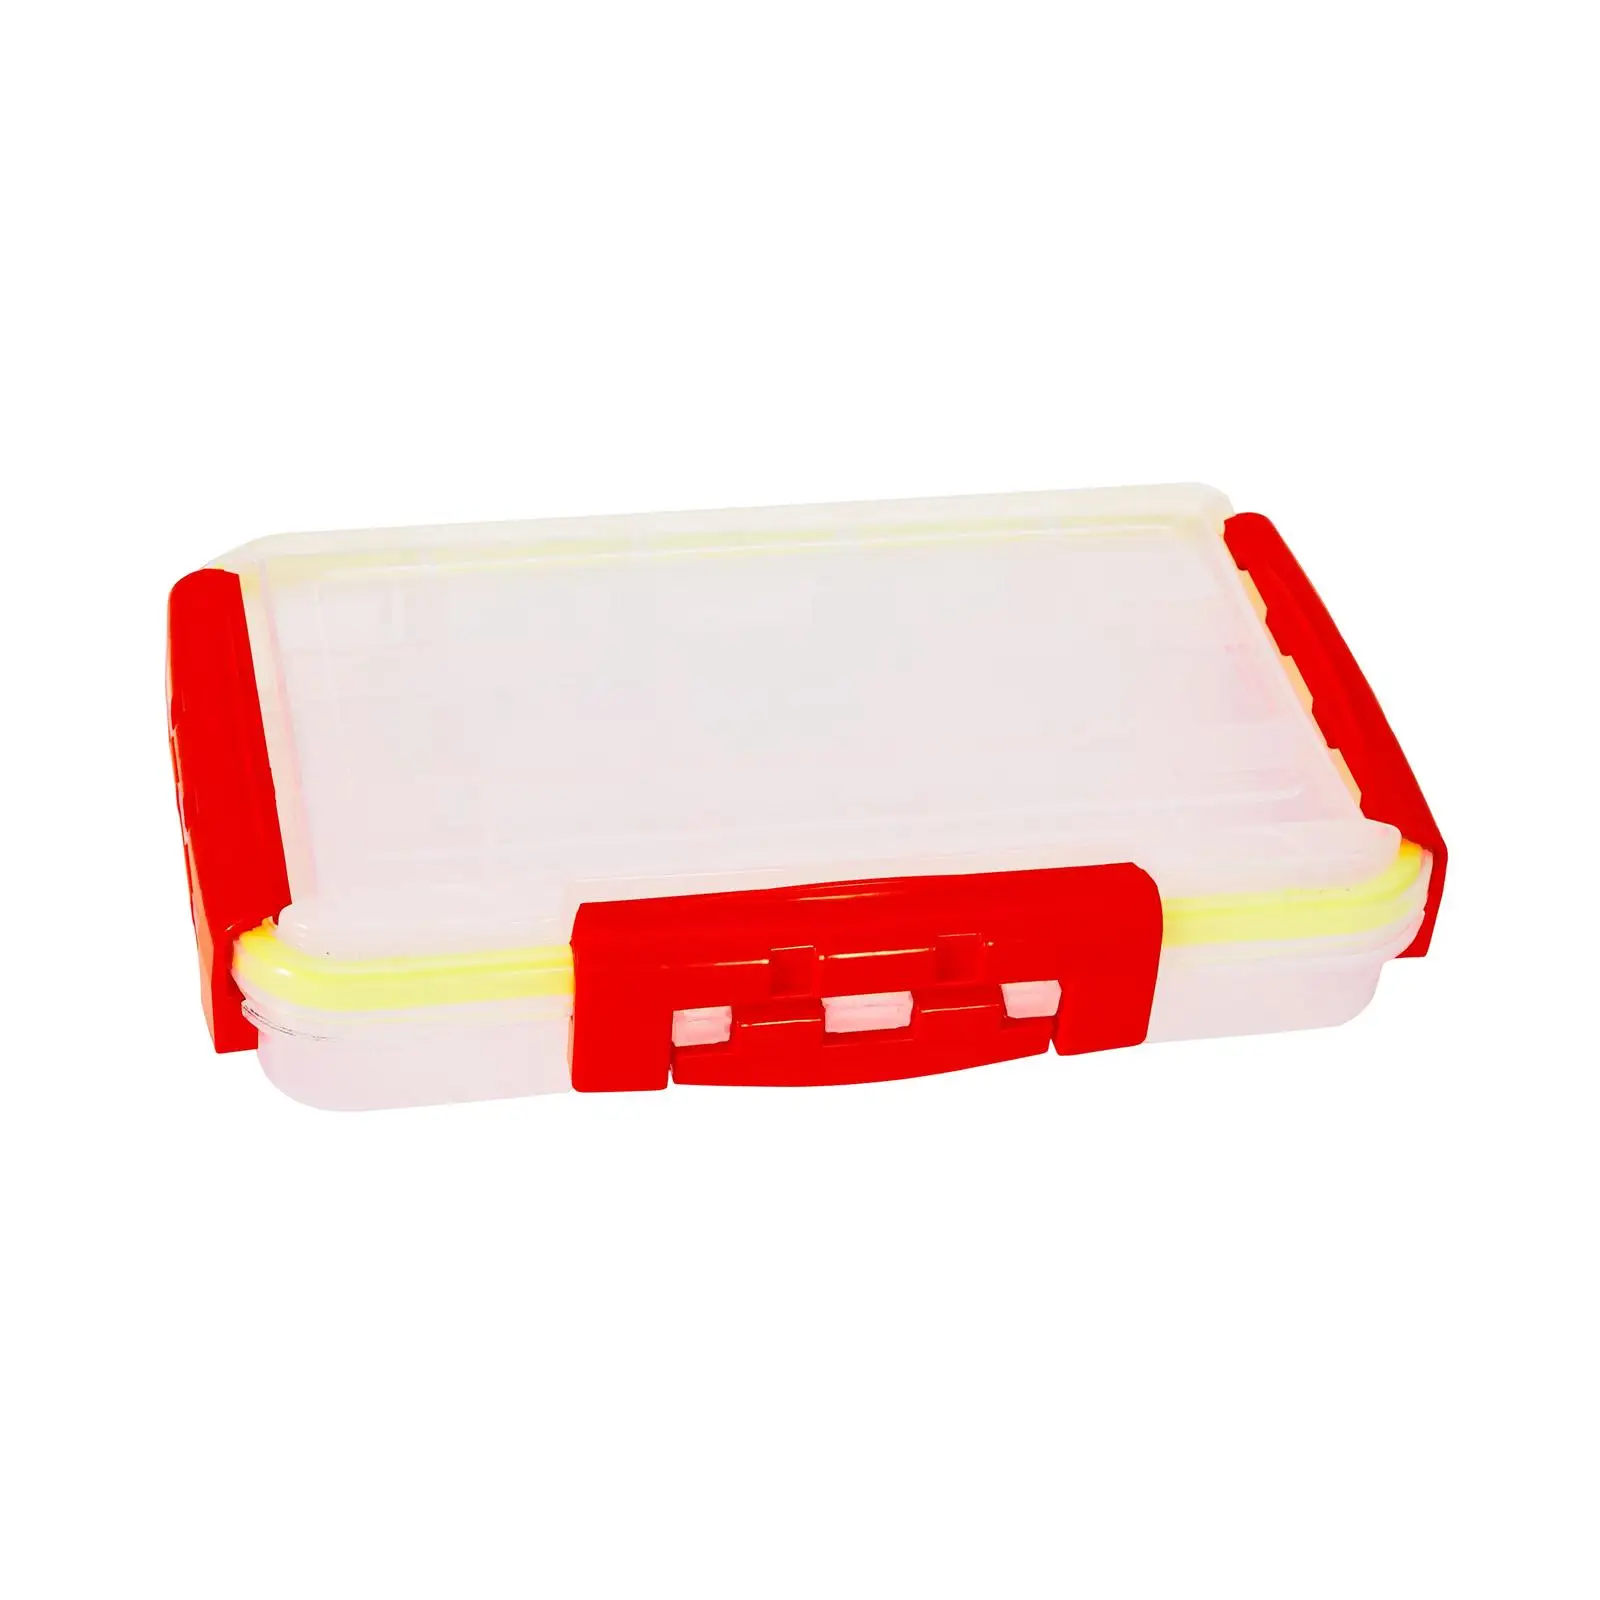 Fishing Lure Box Storage Containers Tray, Fishing Tackle Box, Fishing Tackleboxes, Fishing Equipment Box, Clear Lid